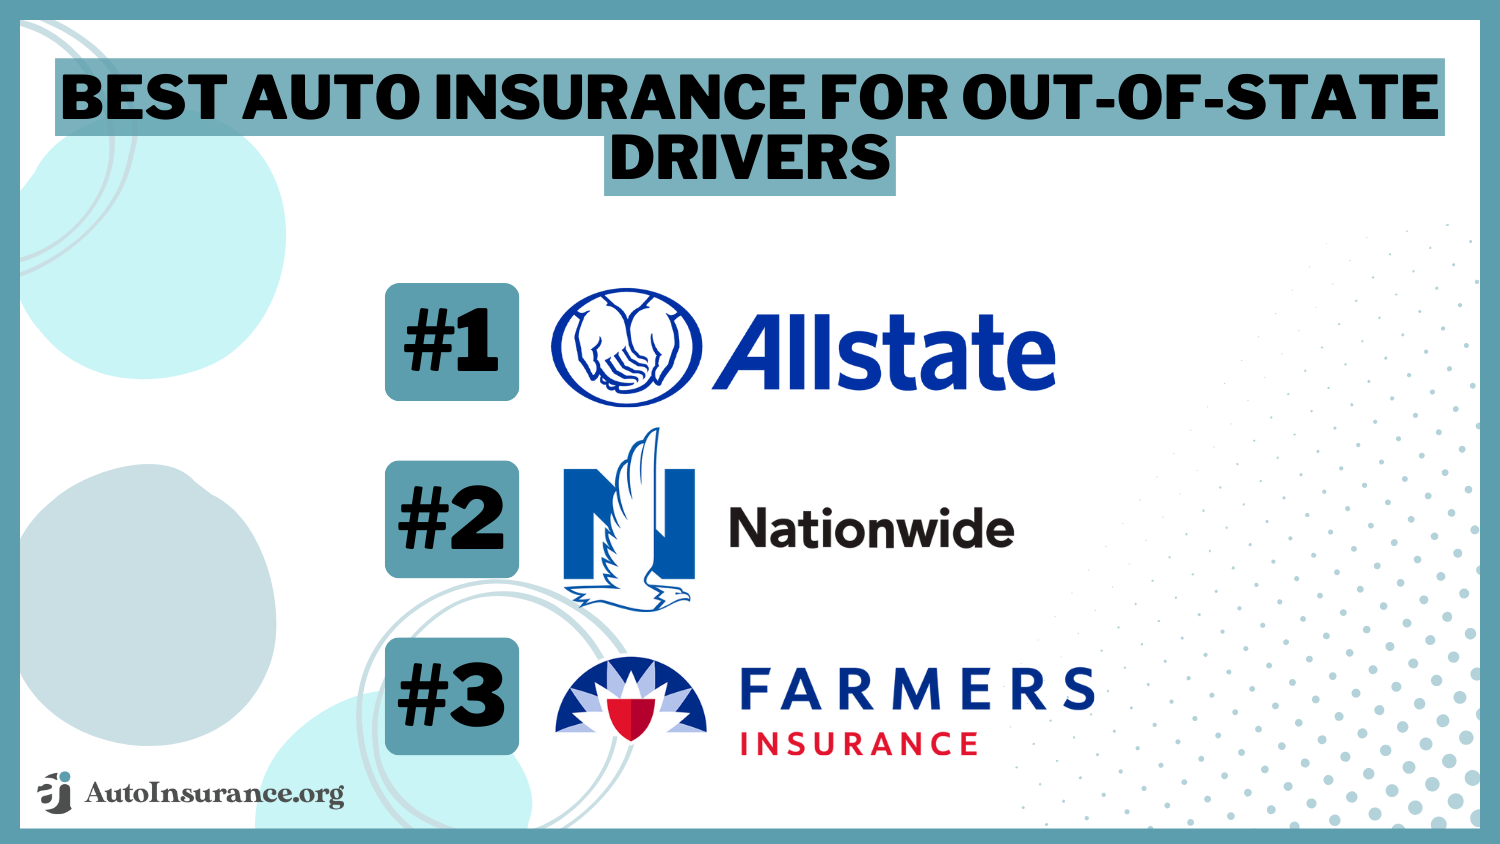 Best Auto Insurance for Out-of-State Drivers: Allstate, Nationwide, and Farmers